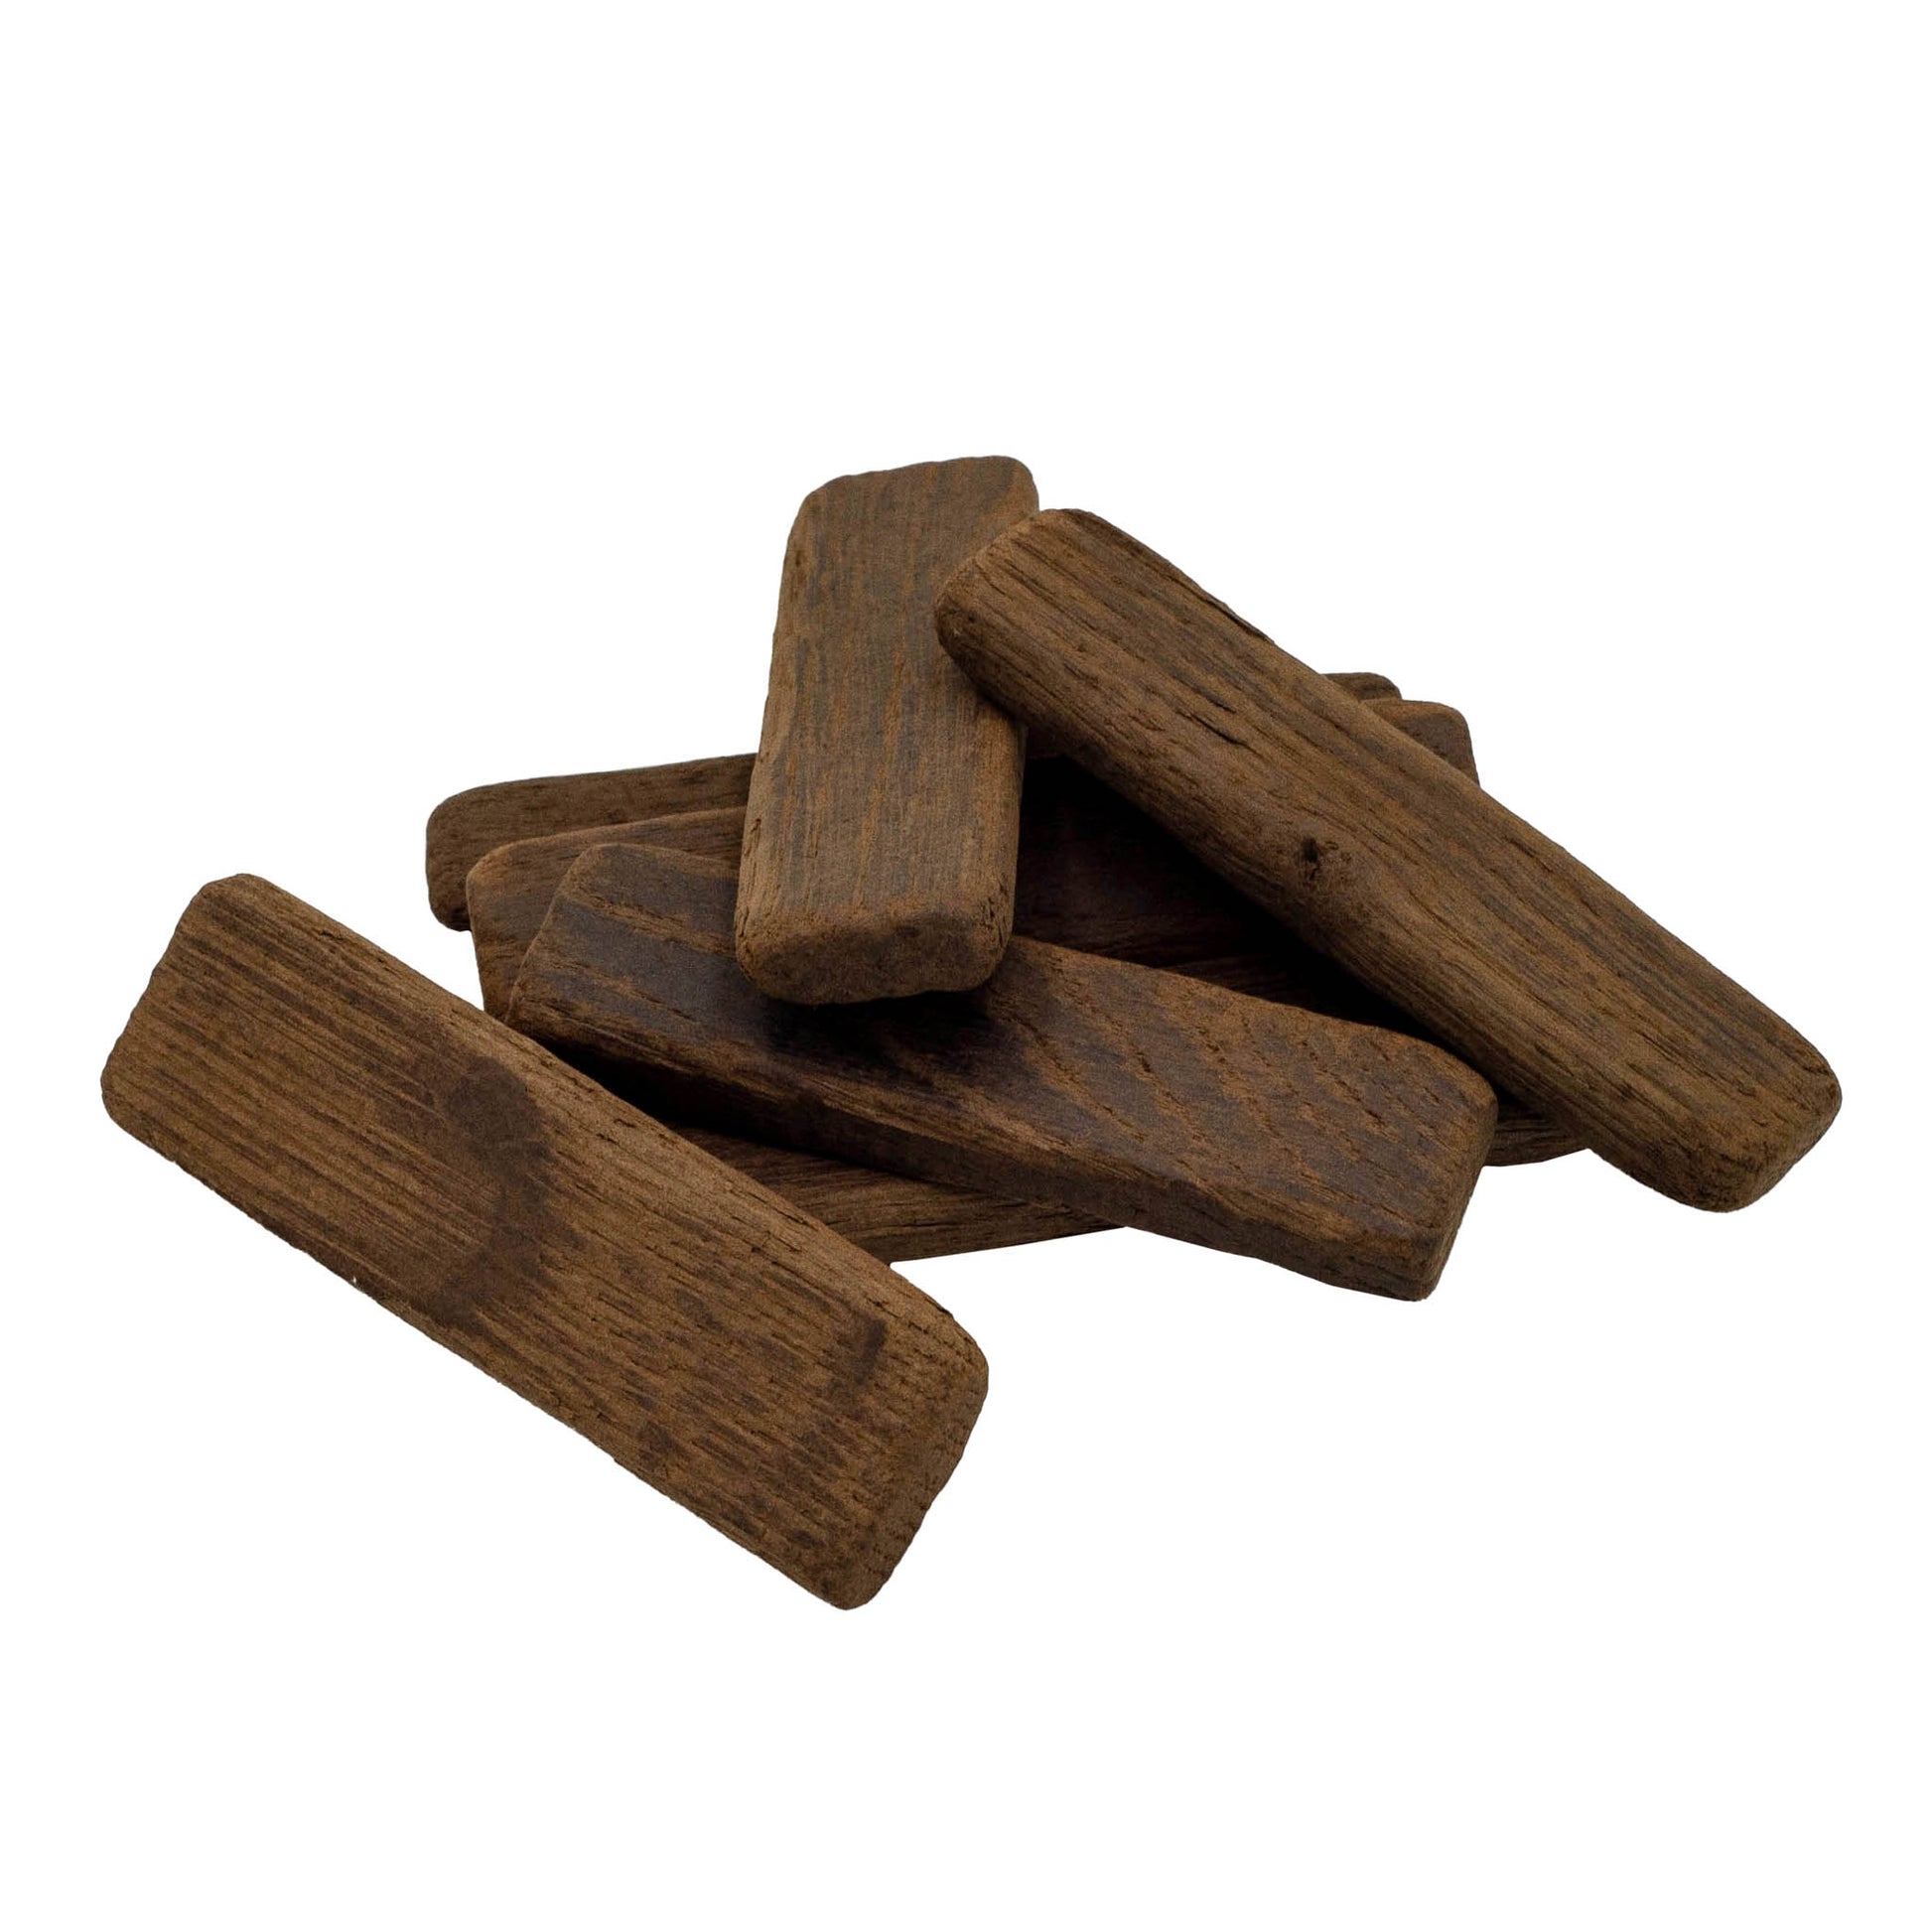 200g bag of american oak wood staves for use during wine making. 